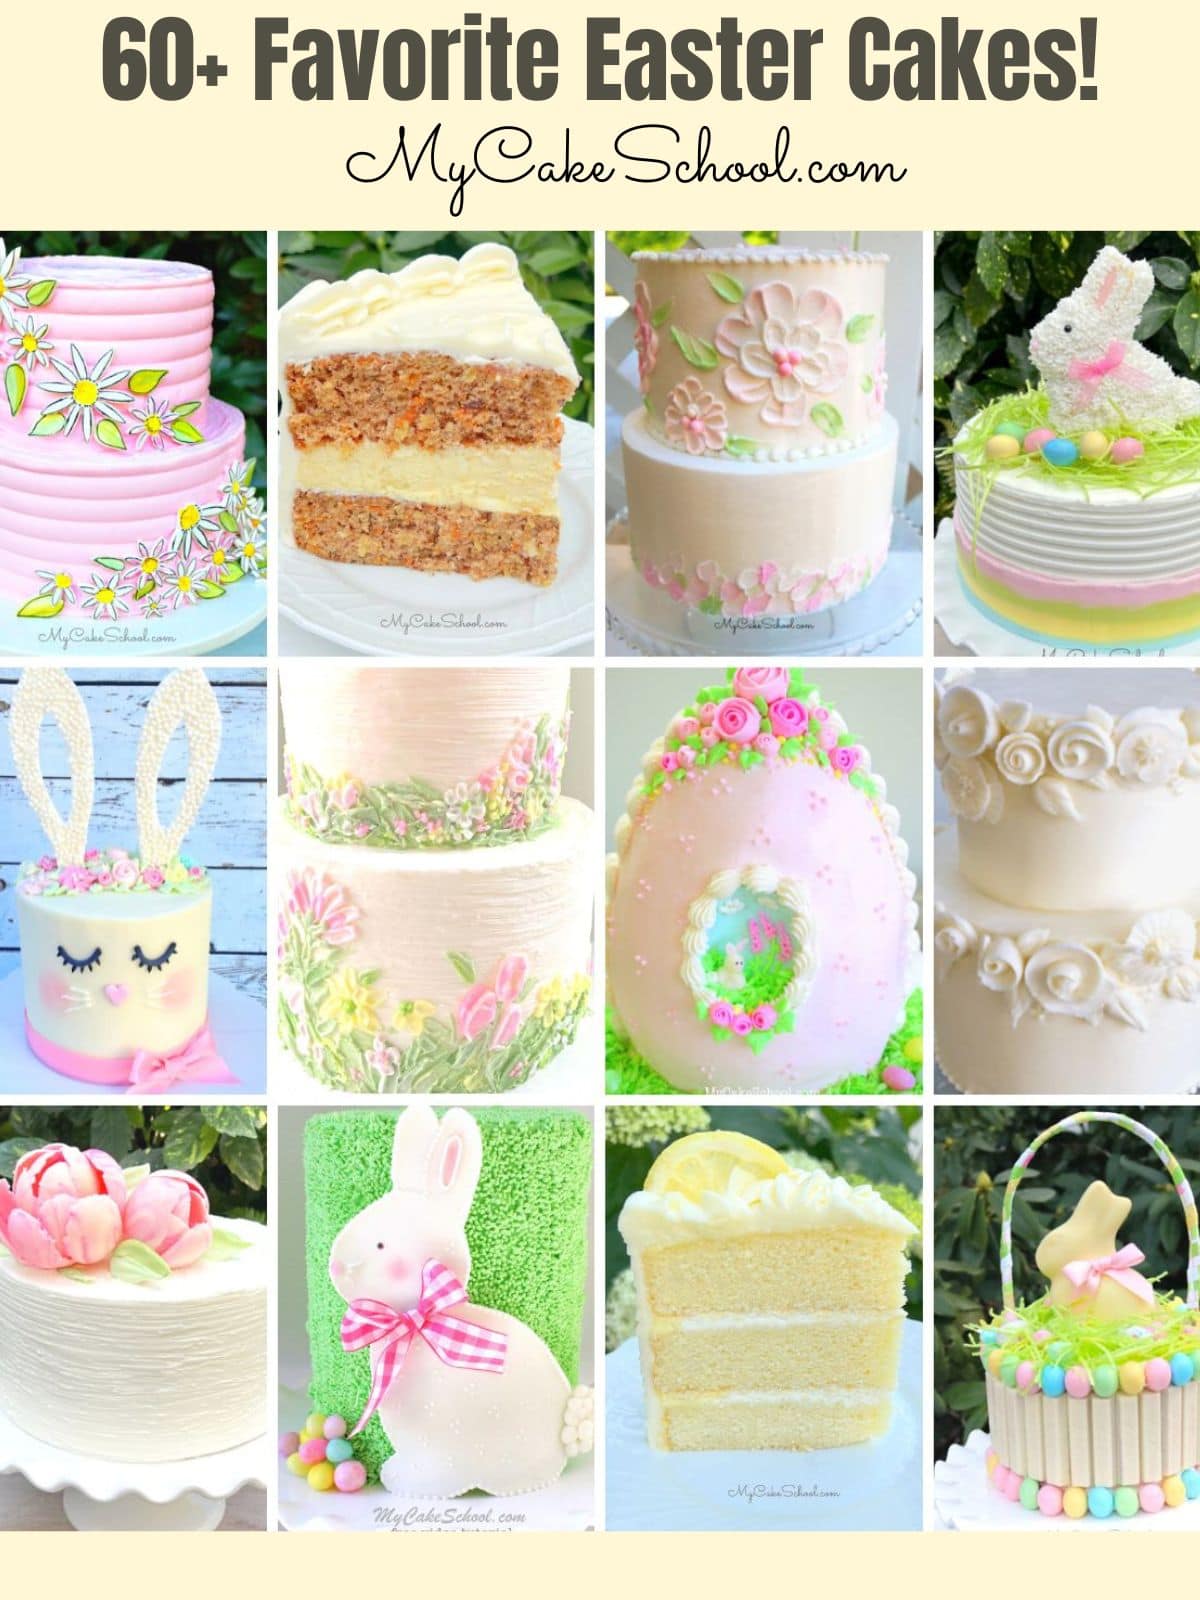 Collage of favorite Easter Cakes and Tutorials